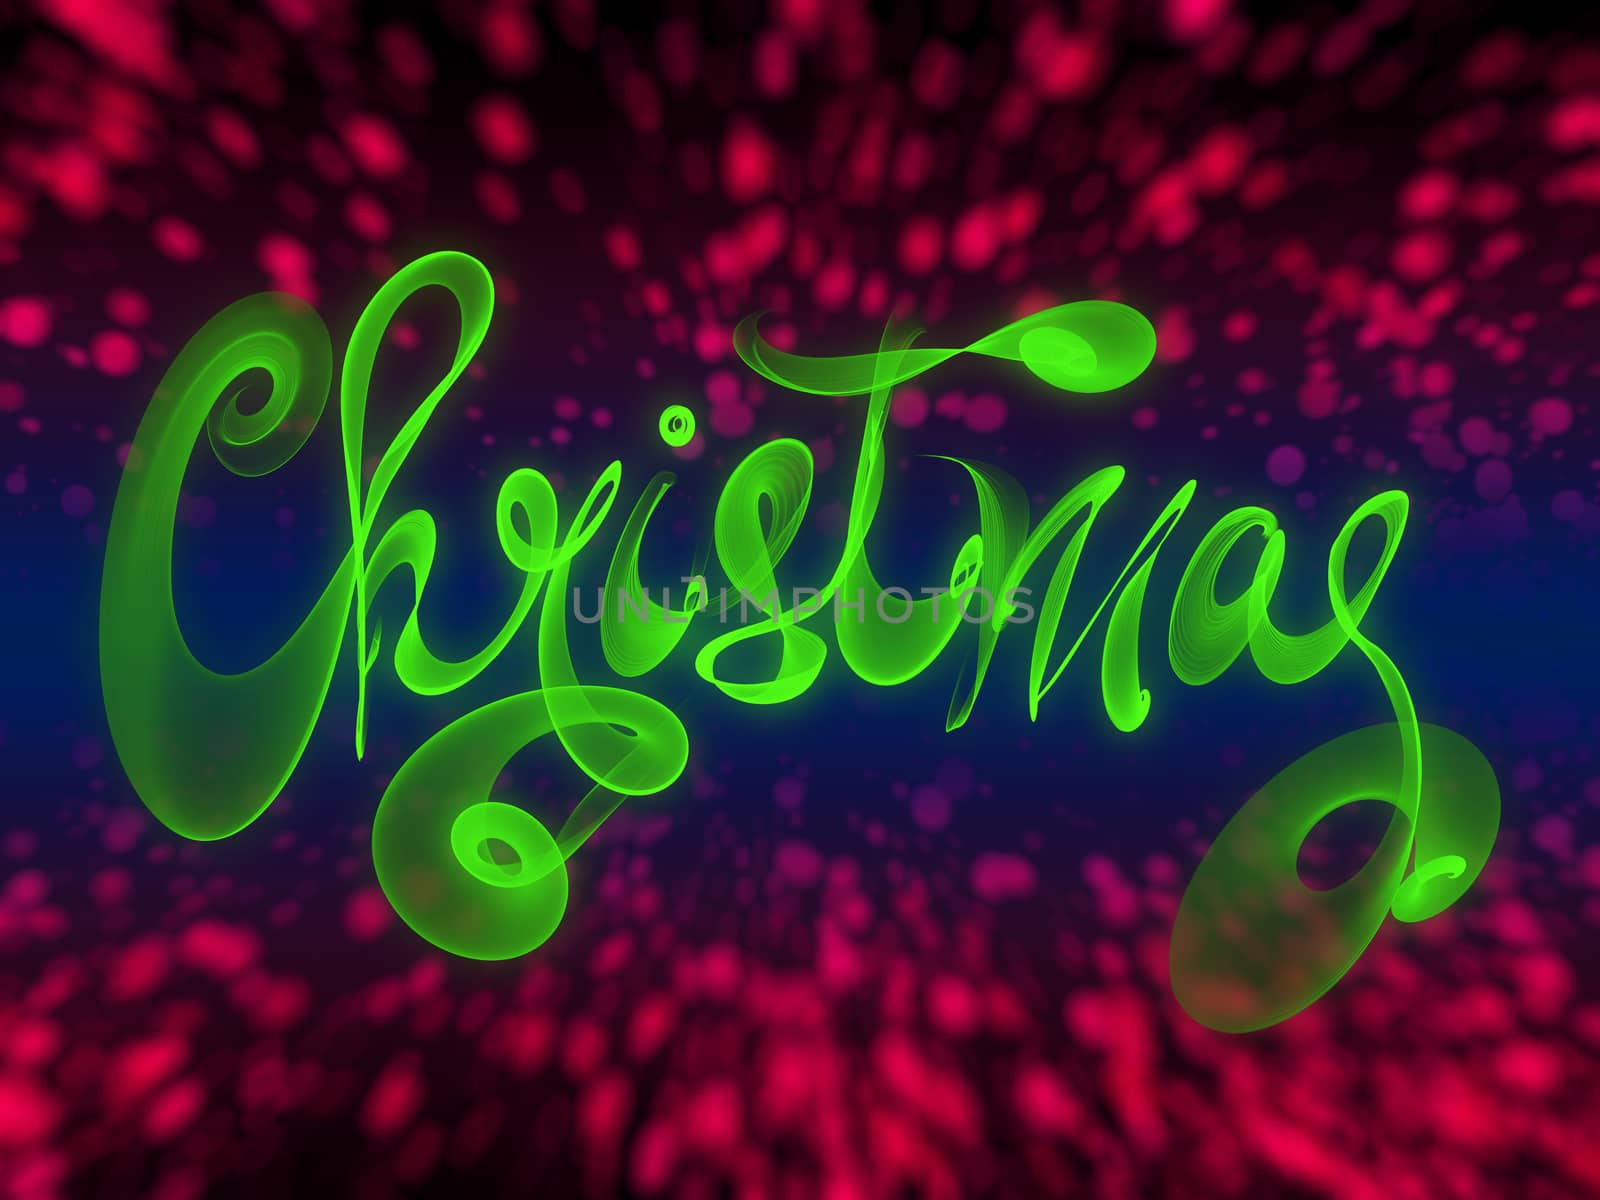 Christmas word lettering written with green fire flame or smoke on blurred bokeh background by skrotov